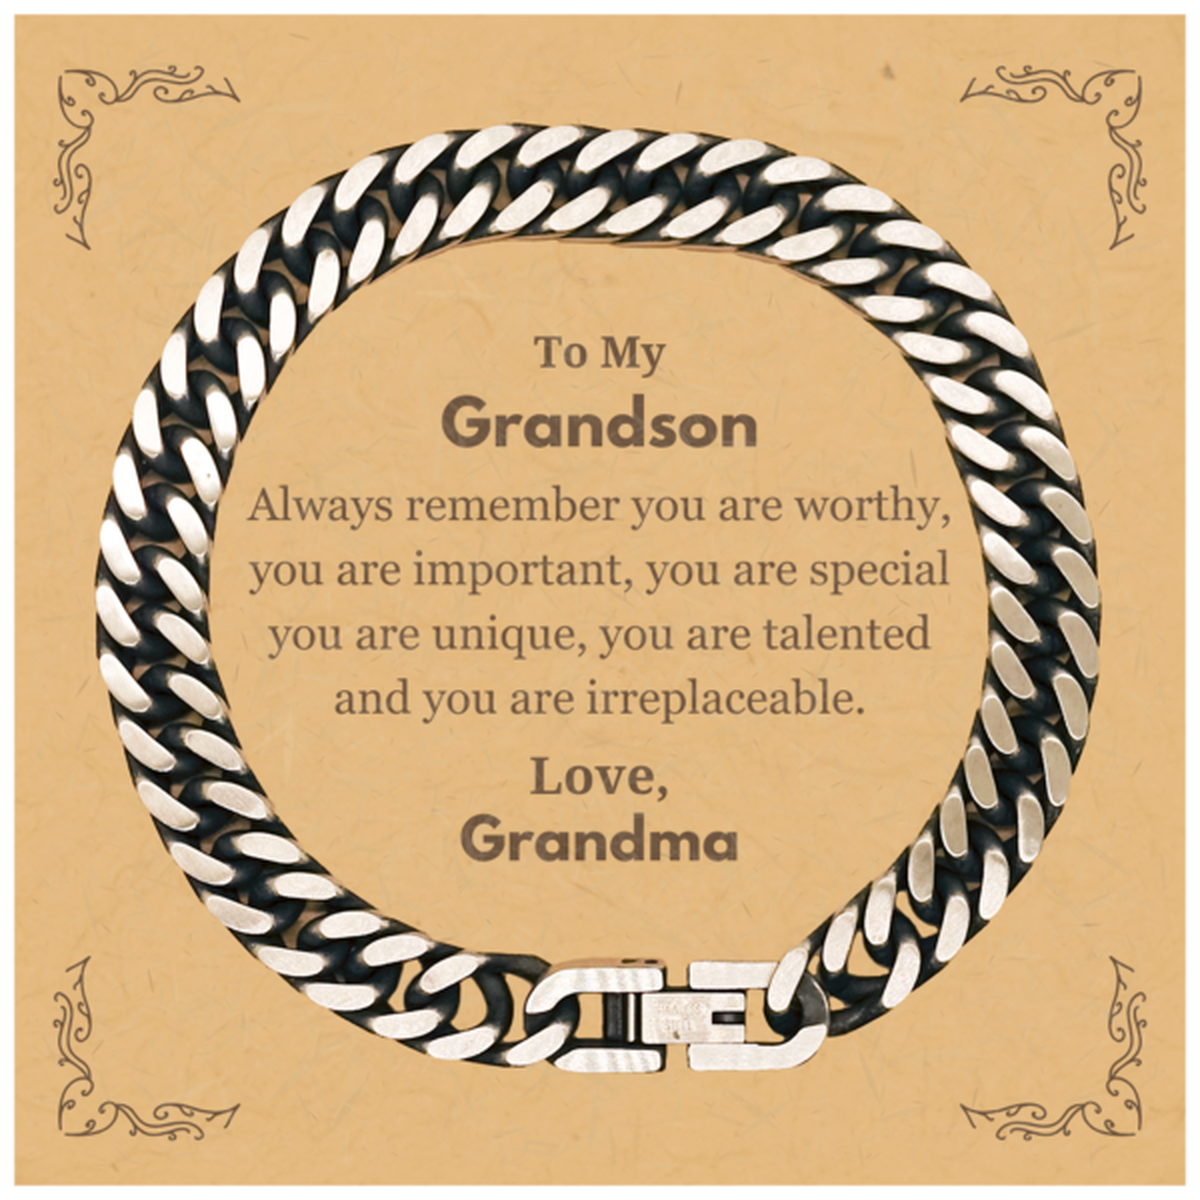 Grandson Birthday Gifts from Grandma, Inspirational Cuban Link Chain Bracelet for Grandson Christmas Graduation Gifts for Grandson Always remember you are worthy, you are important. Love, Grandma